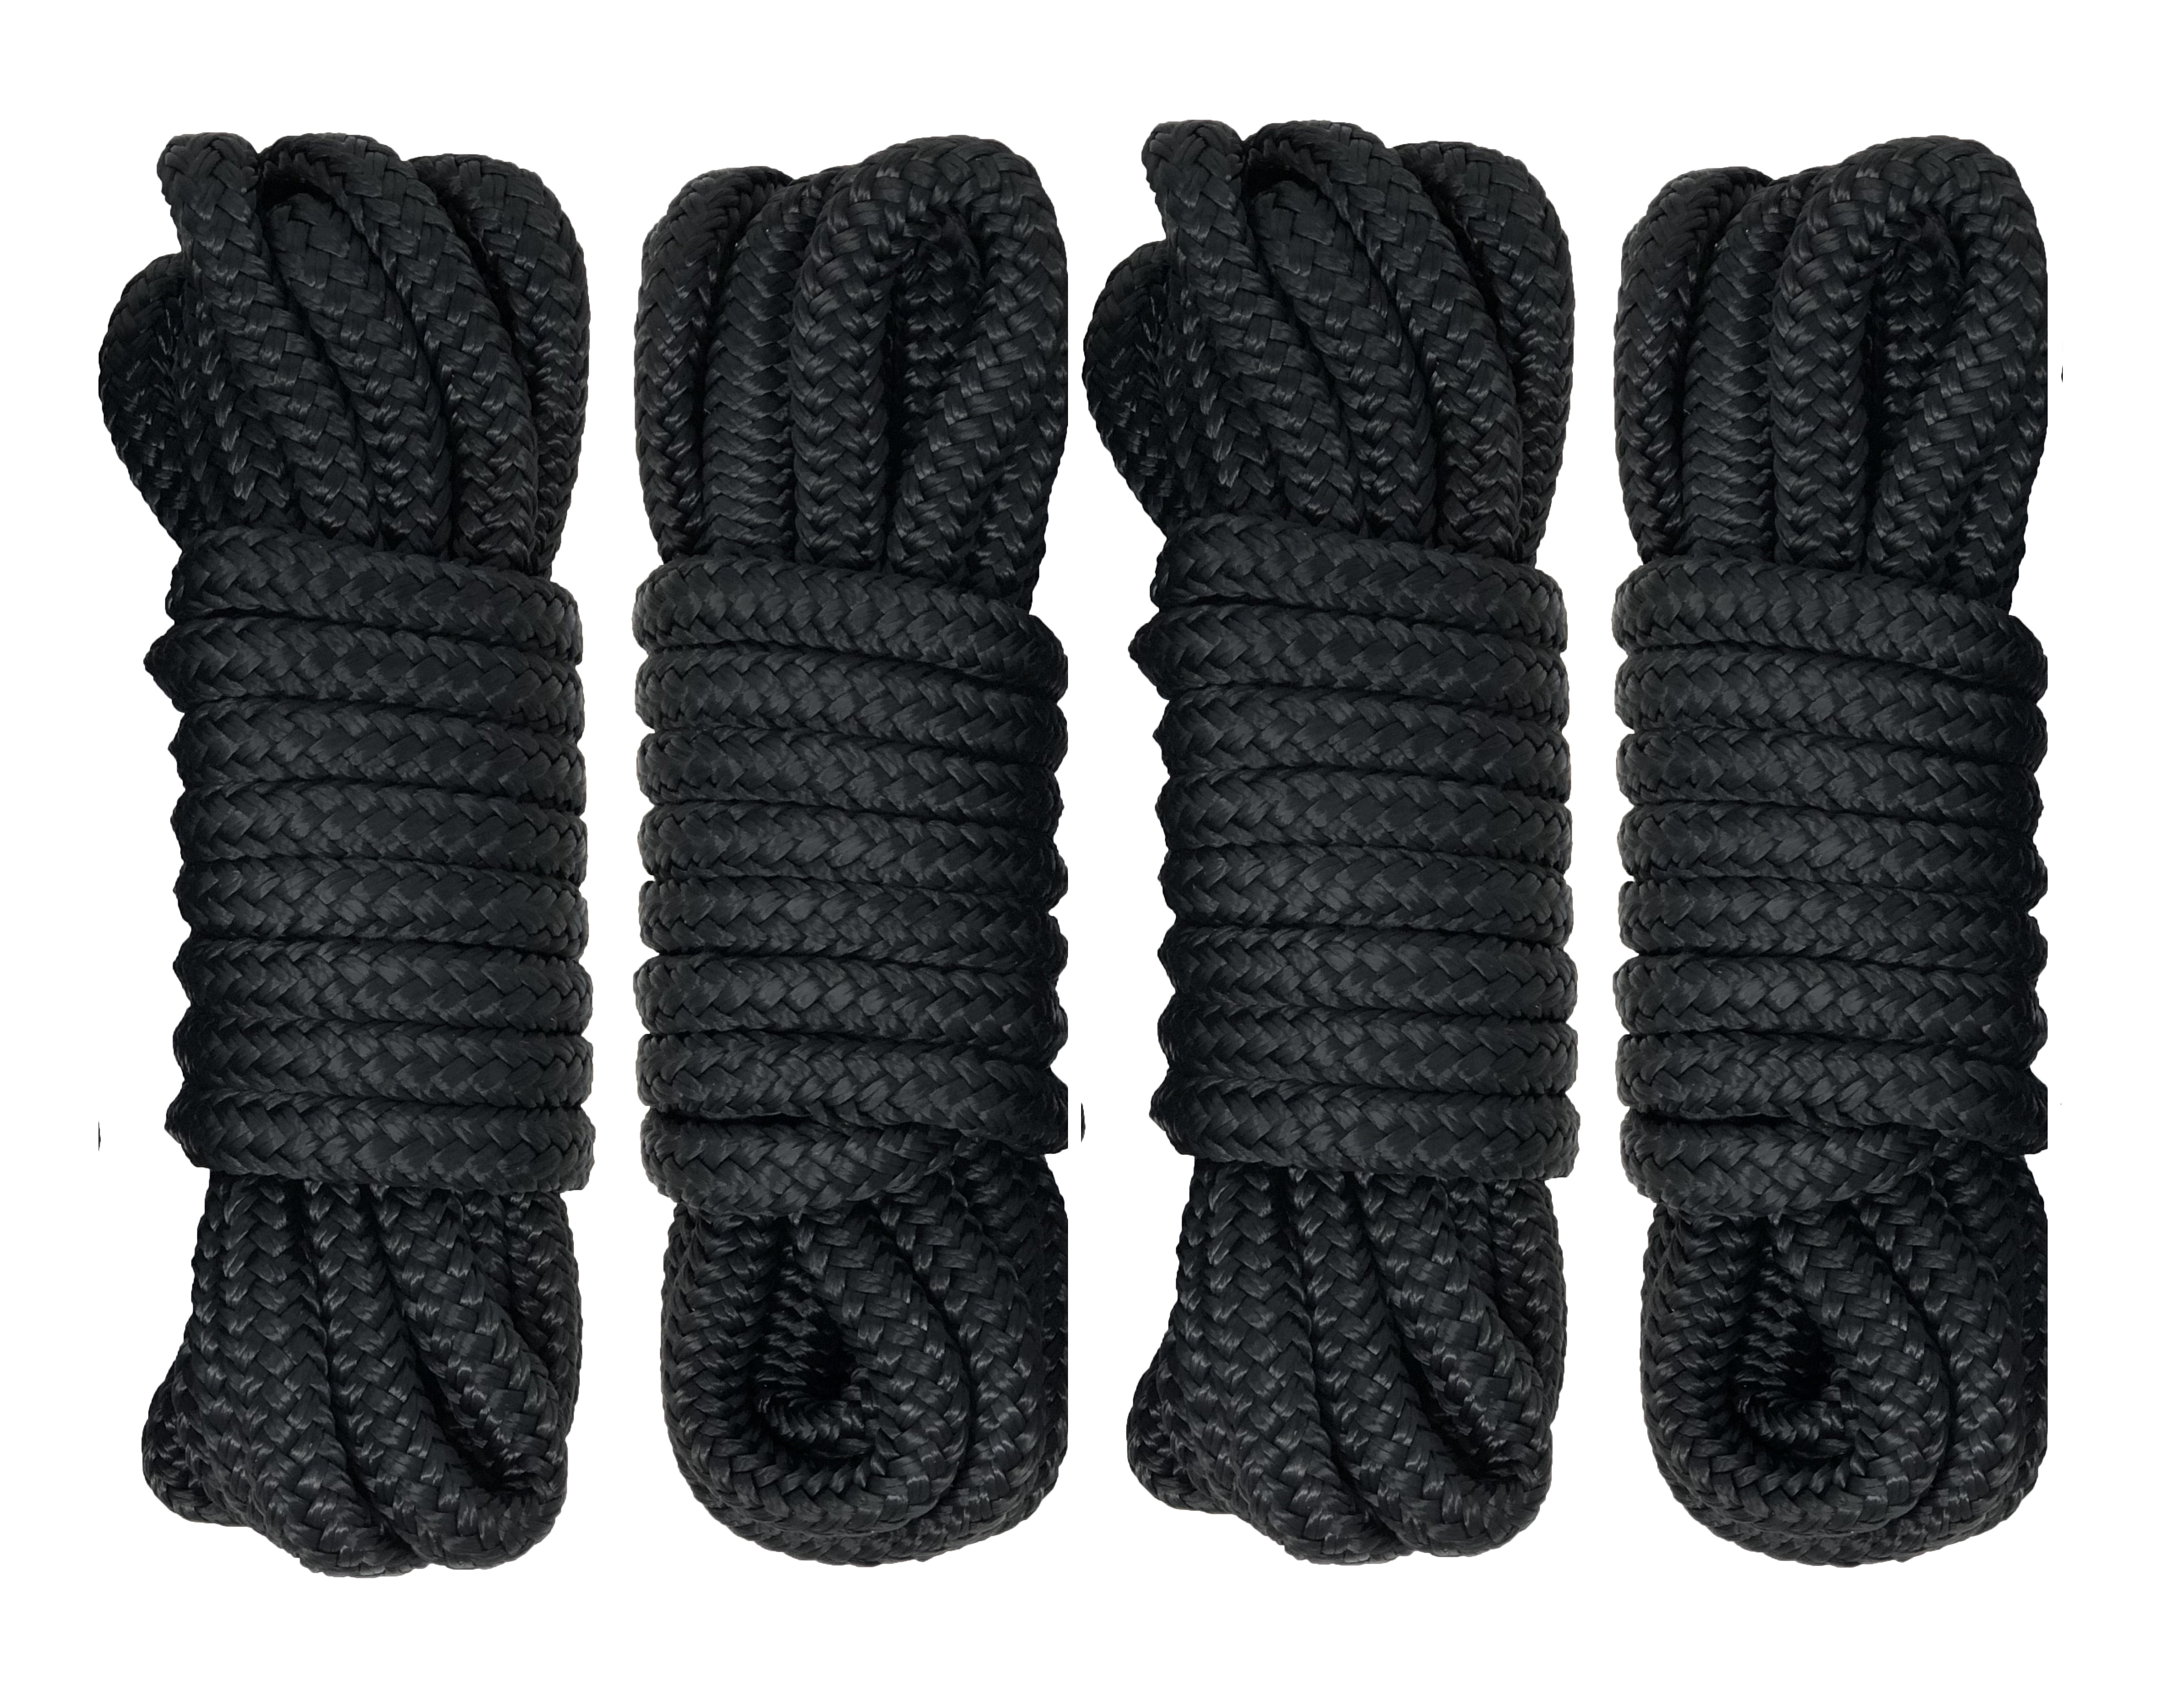  7FT Bungee Boat Dock Line,Mooring Rope,Stretchable Docking  String for Pontoon, Jet Ski, SeaDoo, WaveRunner, Kayak, Boat Accessories  with Stainless Steel Clip,7FT-10FT, Black,1 Pack : Sports & Outdoors